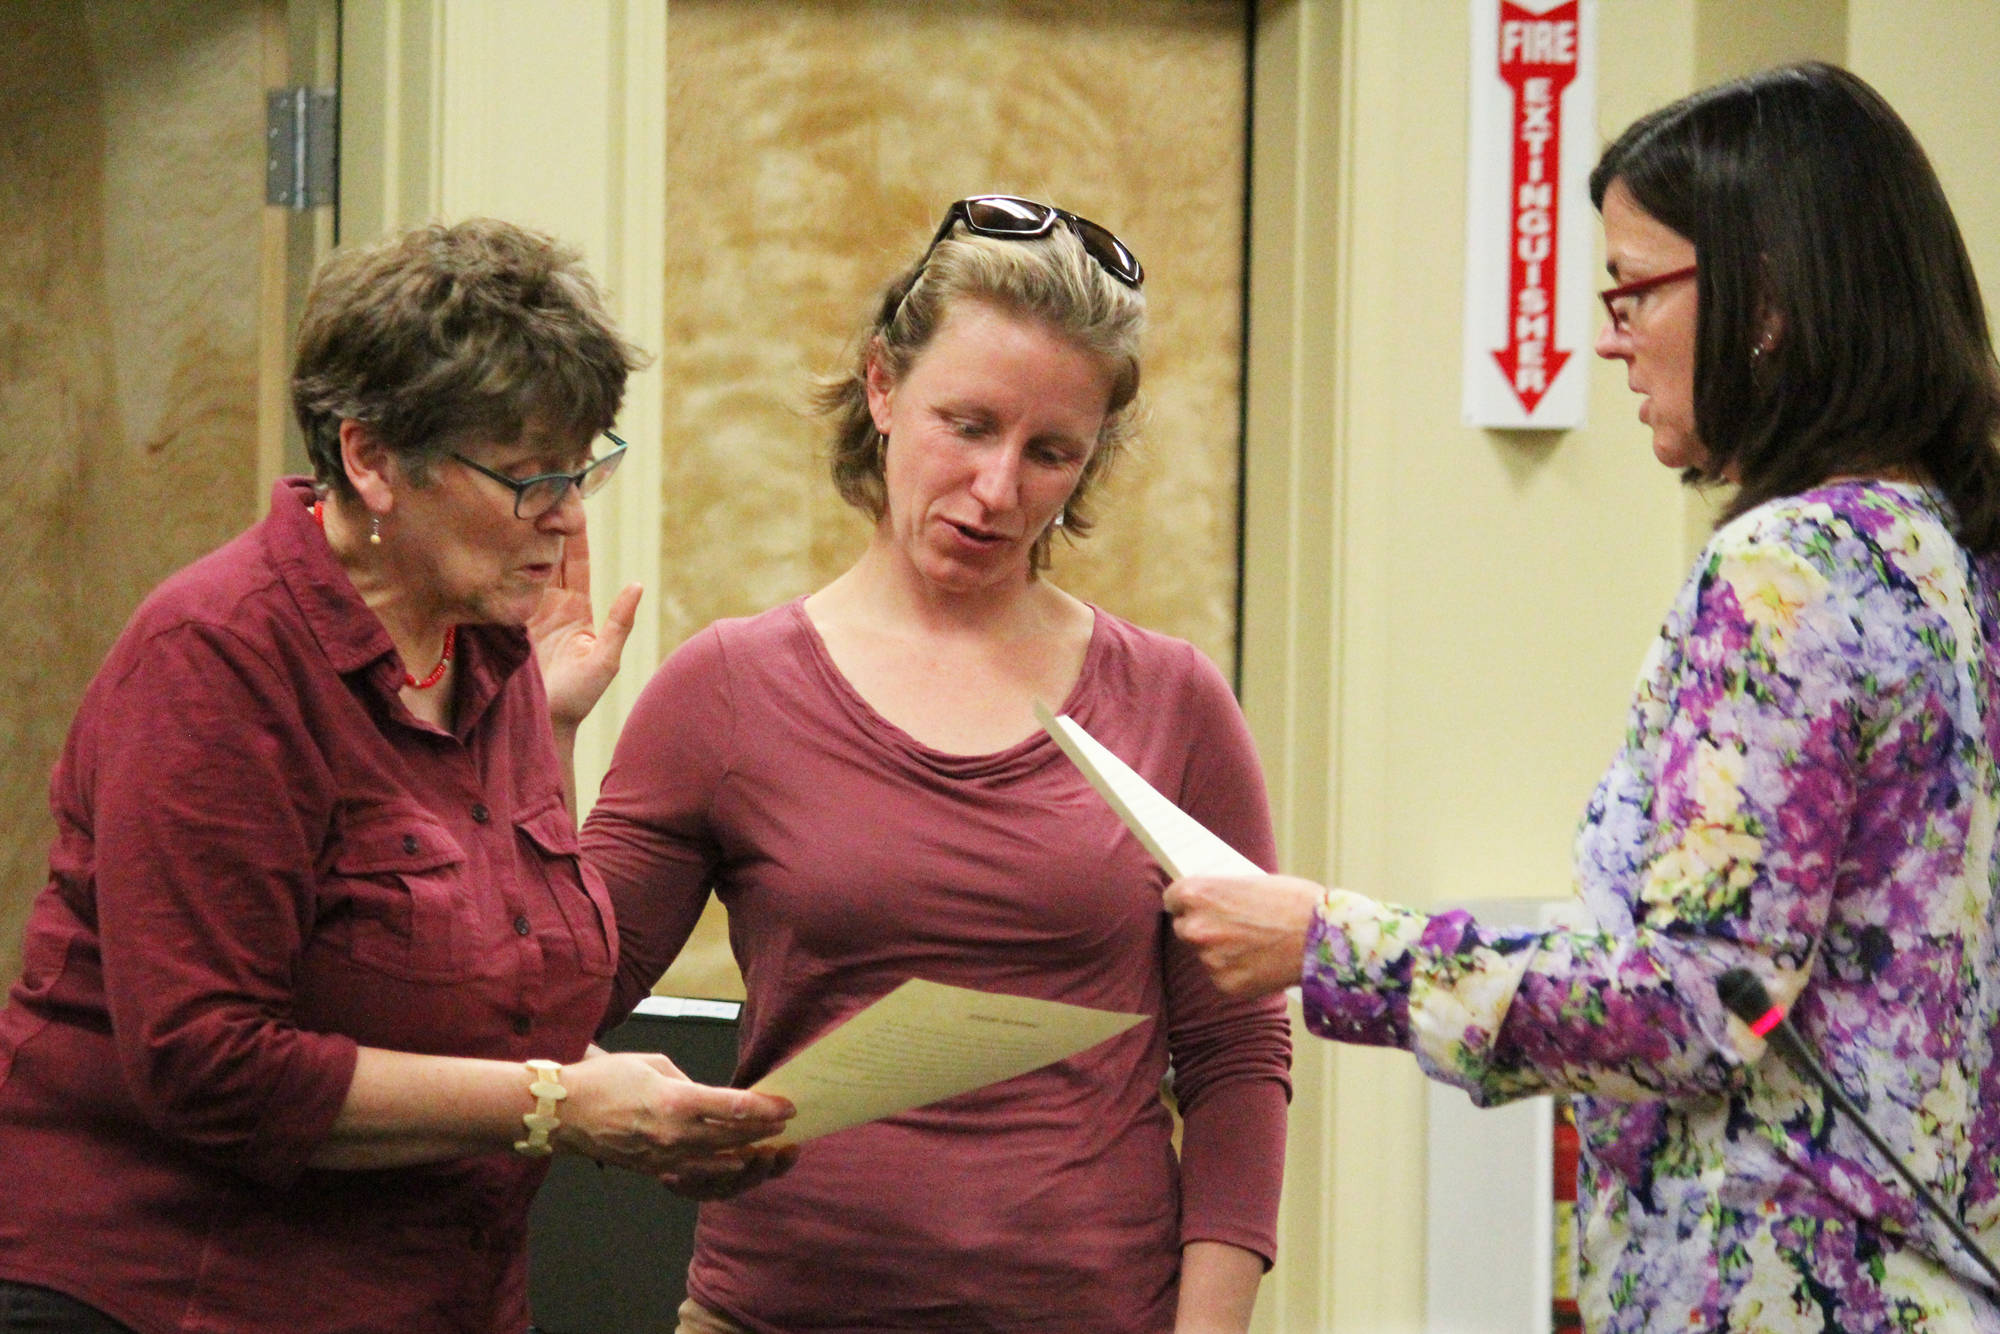 Caroline Venuti (left) and Rachel Lord (center) are sworn in as Homer City Council members by City Clerk Melissa Jacobsen (right) on Monday, Oct. 9, 2017 at the Cowles Council Chambers in Homer, Alaska. (Photo by Megan Pacer/Homer News)